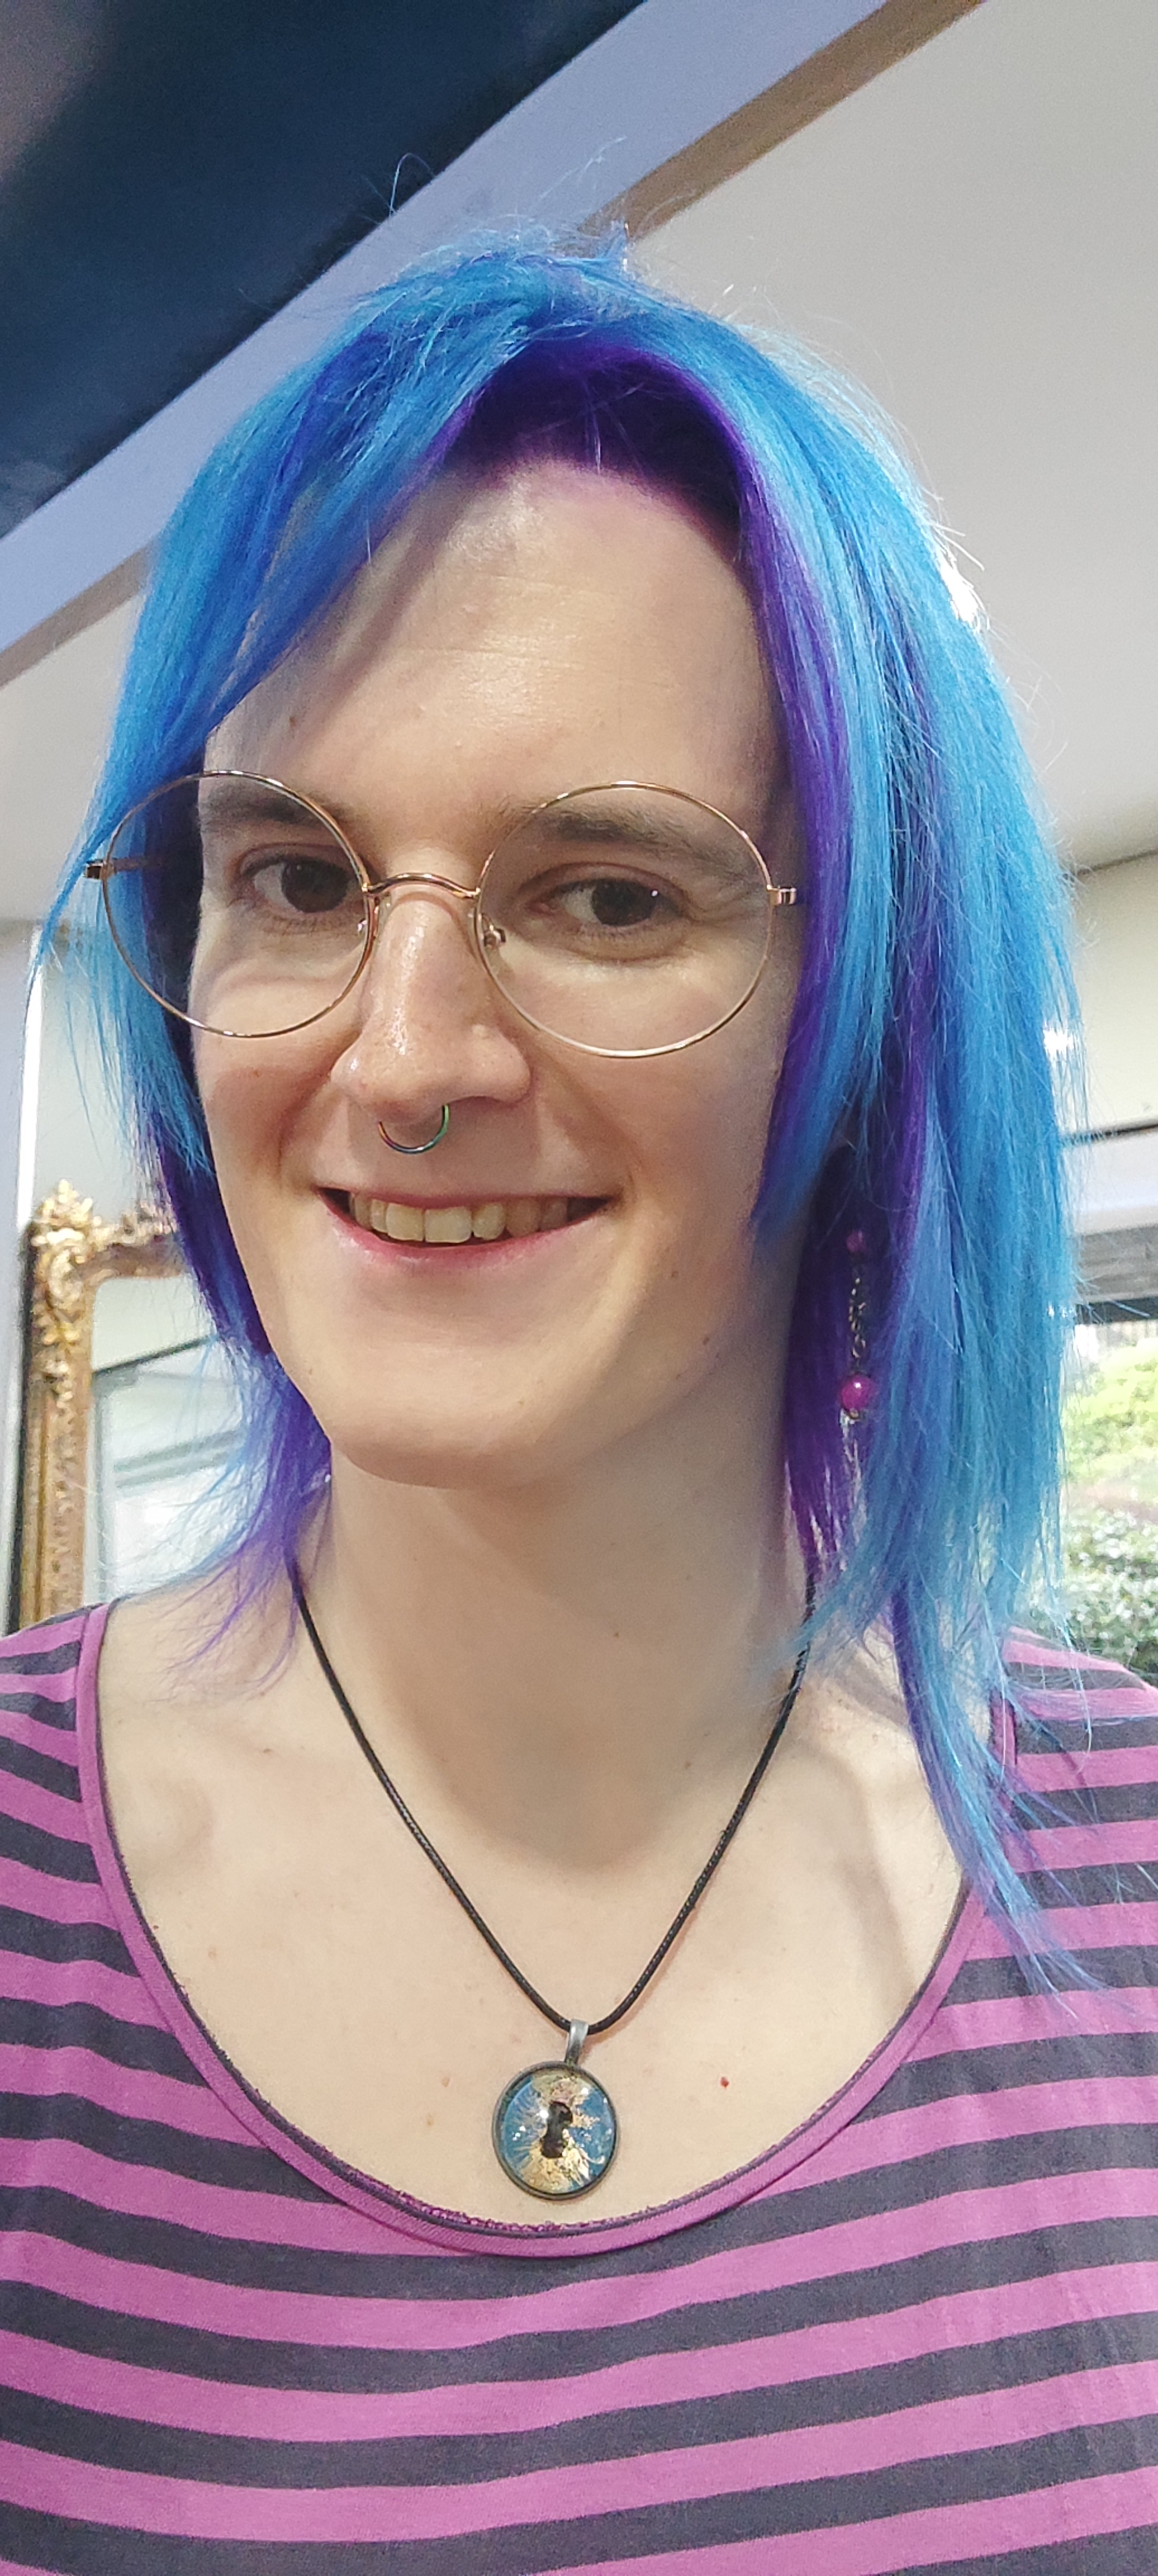 A white woman with blue and purple hair, round glasses and a septum ring is smiling, wearing a striped pink and black top.